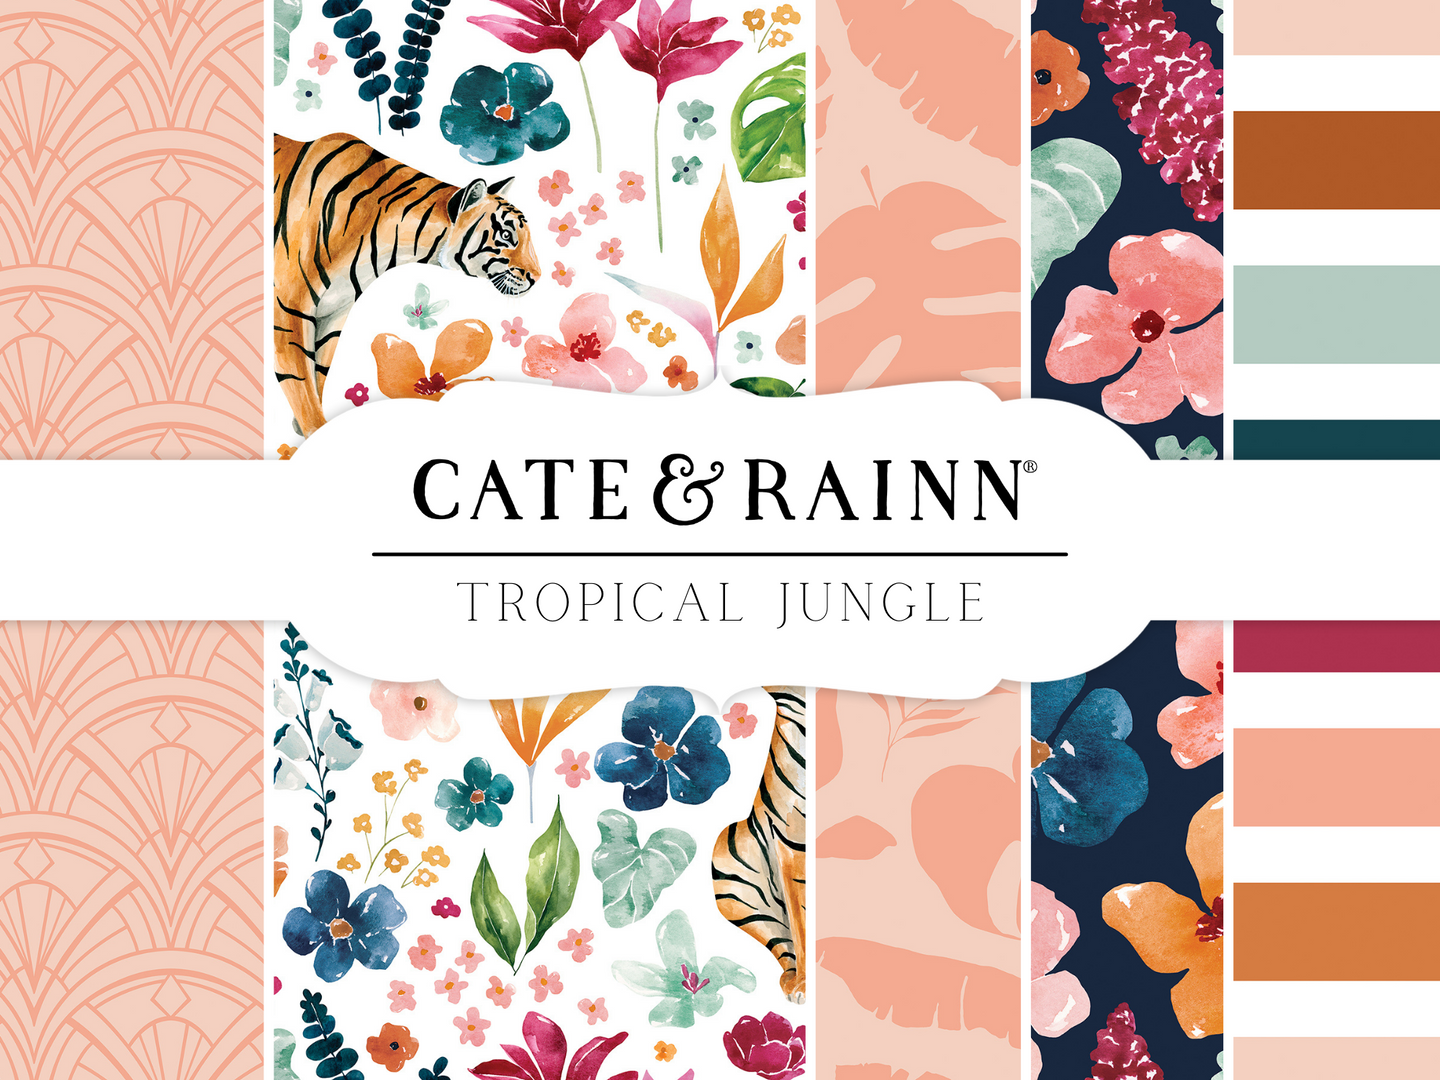 Jungle Collection by Cate & Rainn - Elephants, Tigers, Macaw, Jaguars, Chameleon